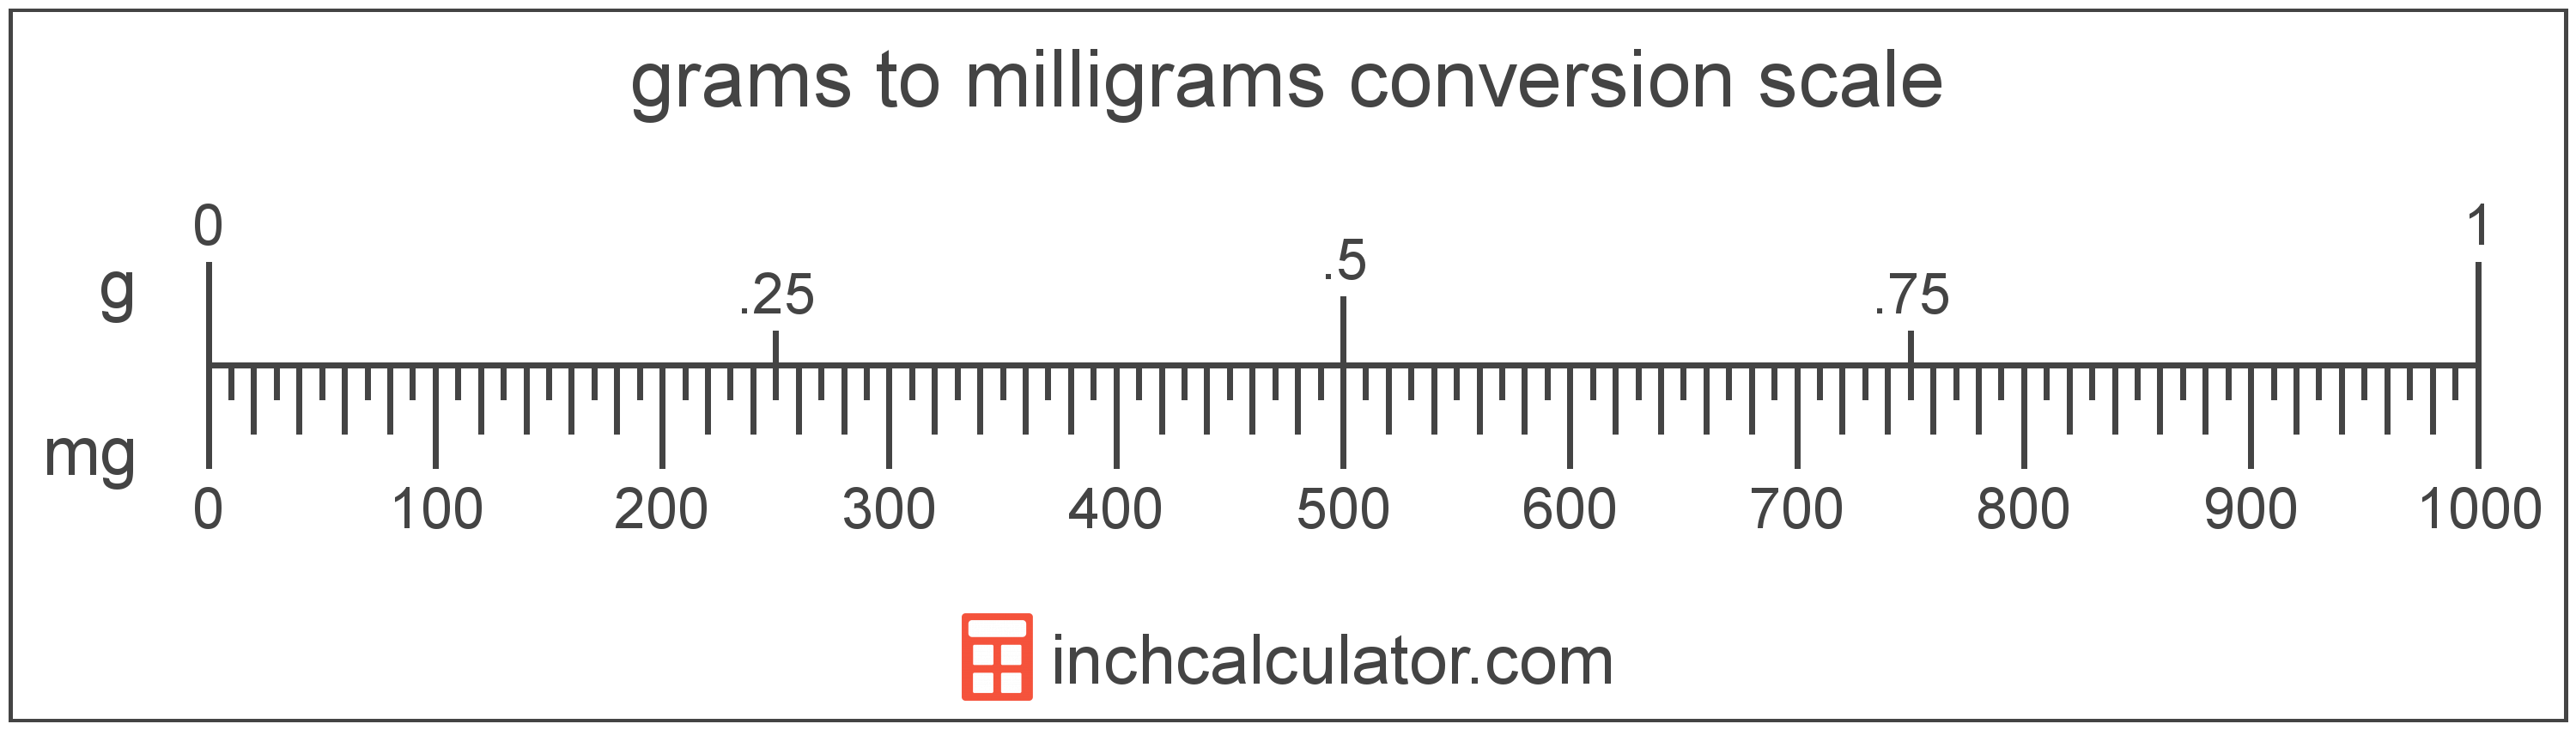 conversion scale showing grams and equivalent milligrams weight values